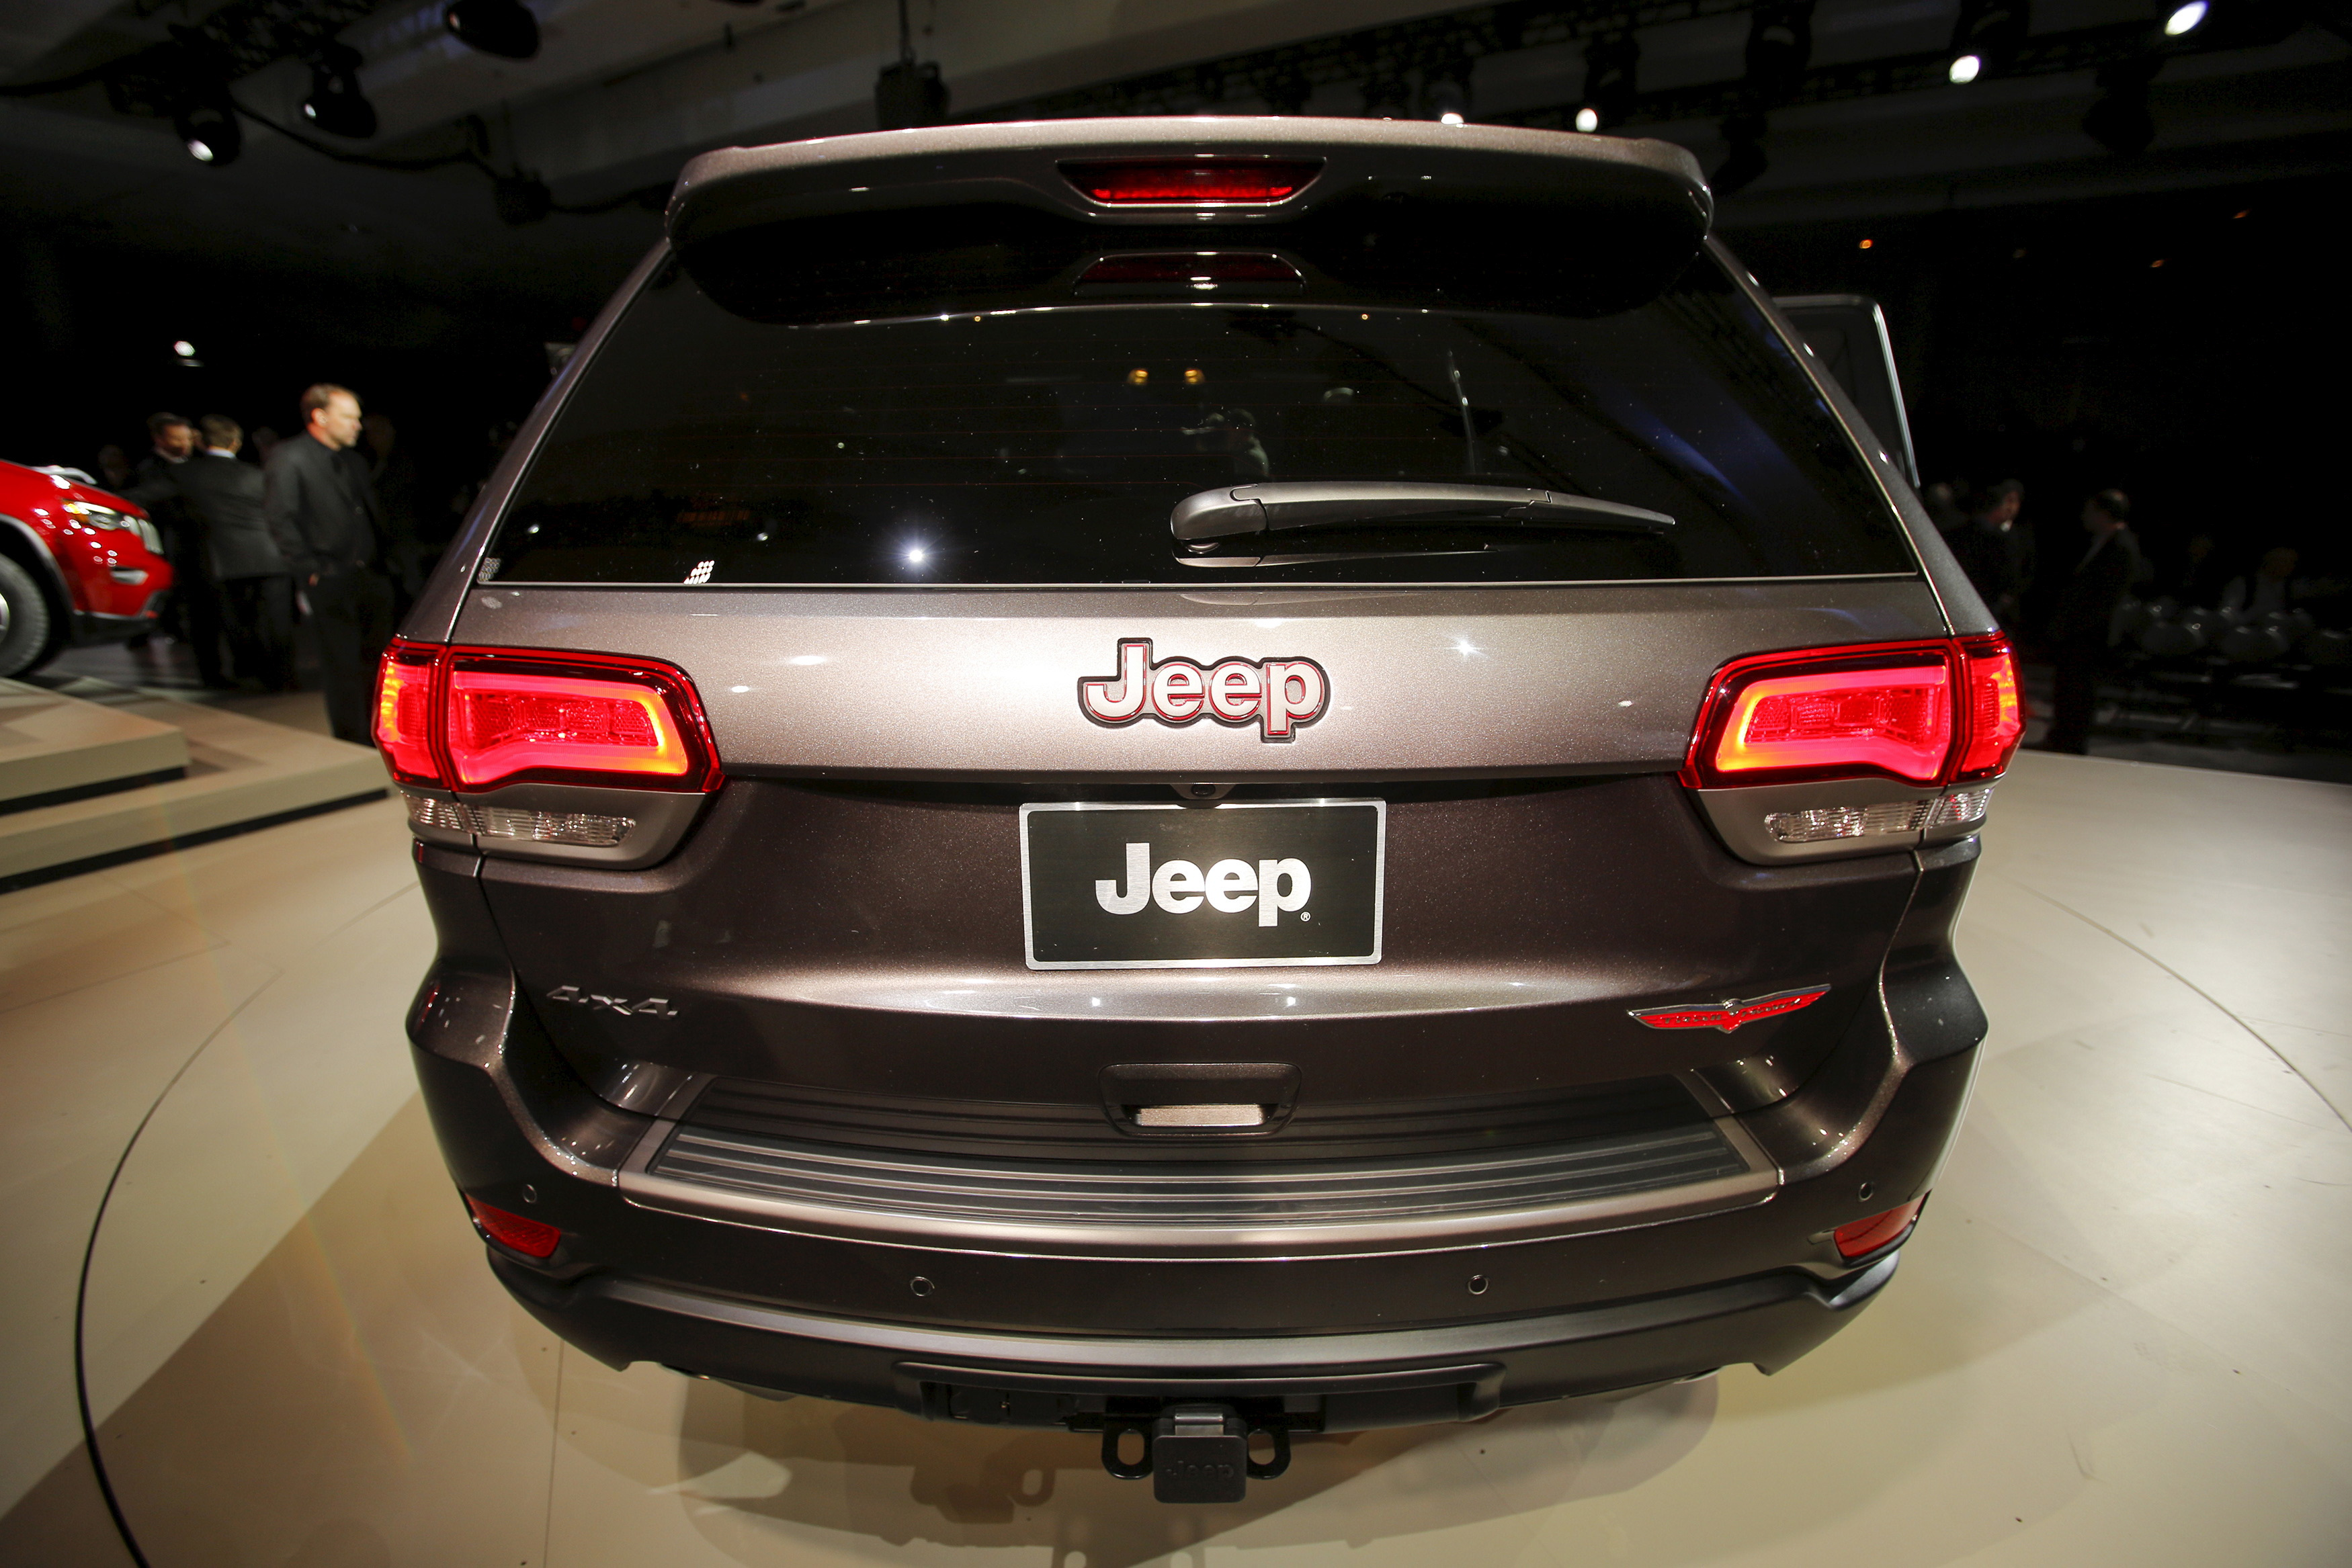 The Jeep Cherokee Trailhawk sports utility vehicle (SUV) is seen during the media preview of the 2016 New York International Auto Show in Manhattan, New York